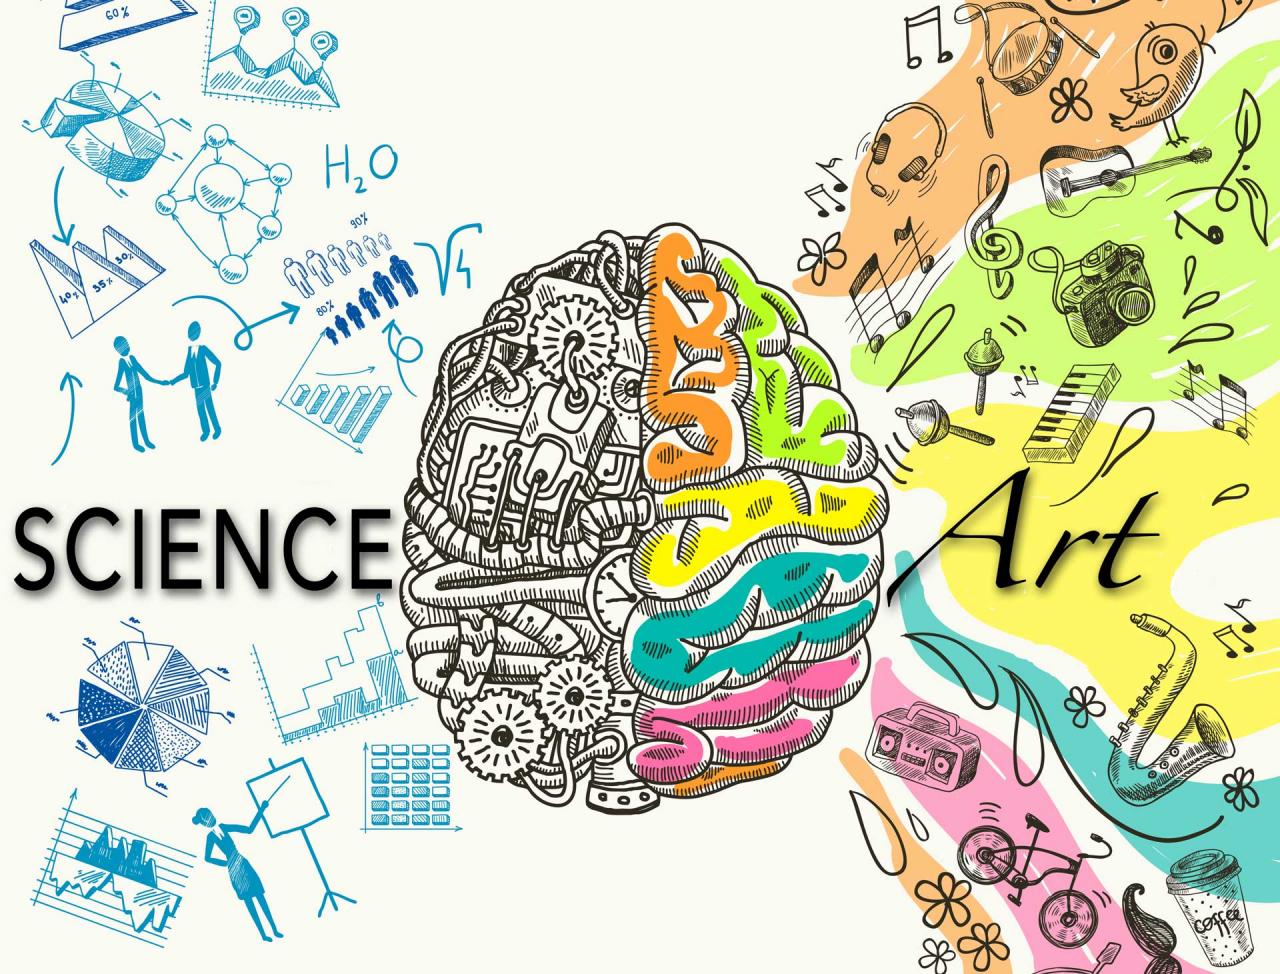 Is marketing management an art or science